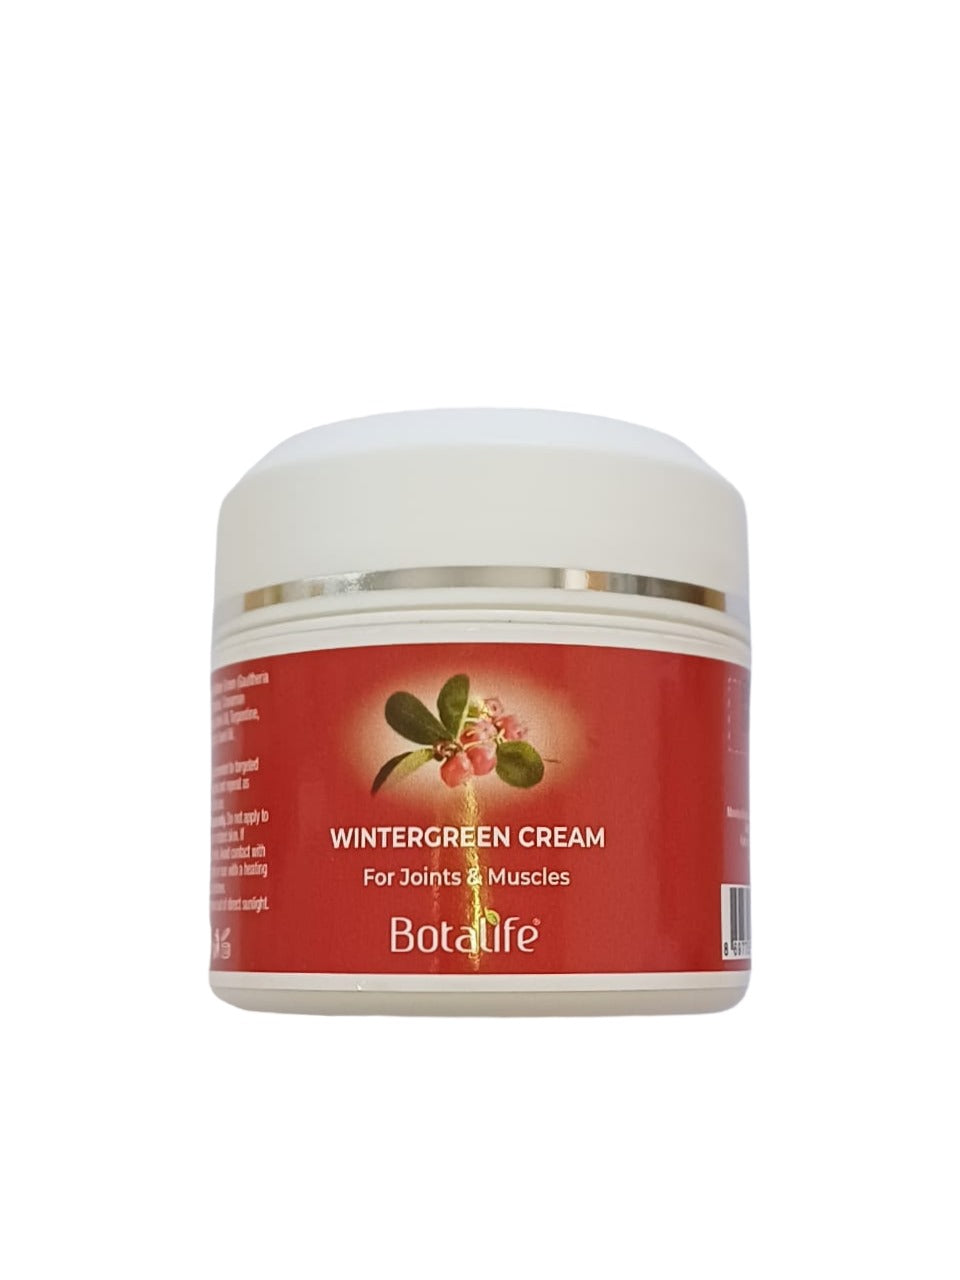 Botalife Wintergreen Cream - Natural Muscle and Joint Relief - 50g